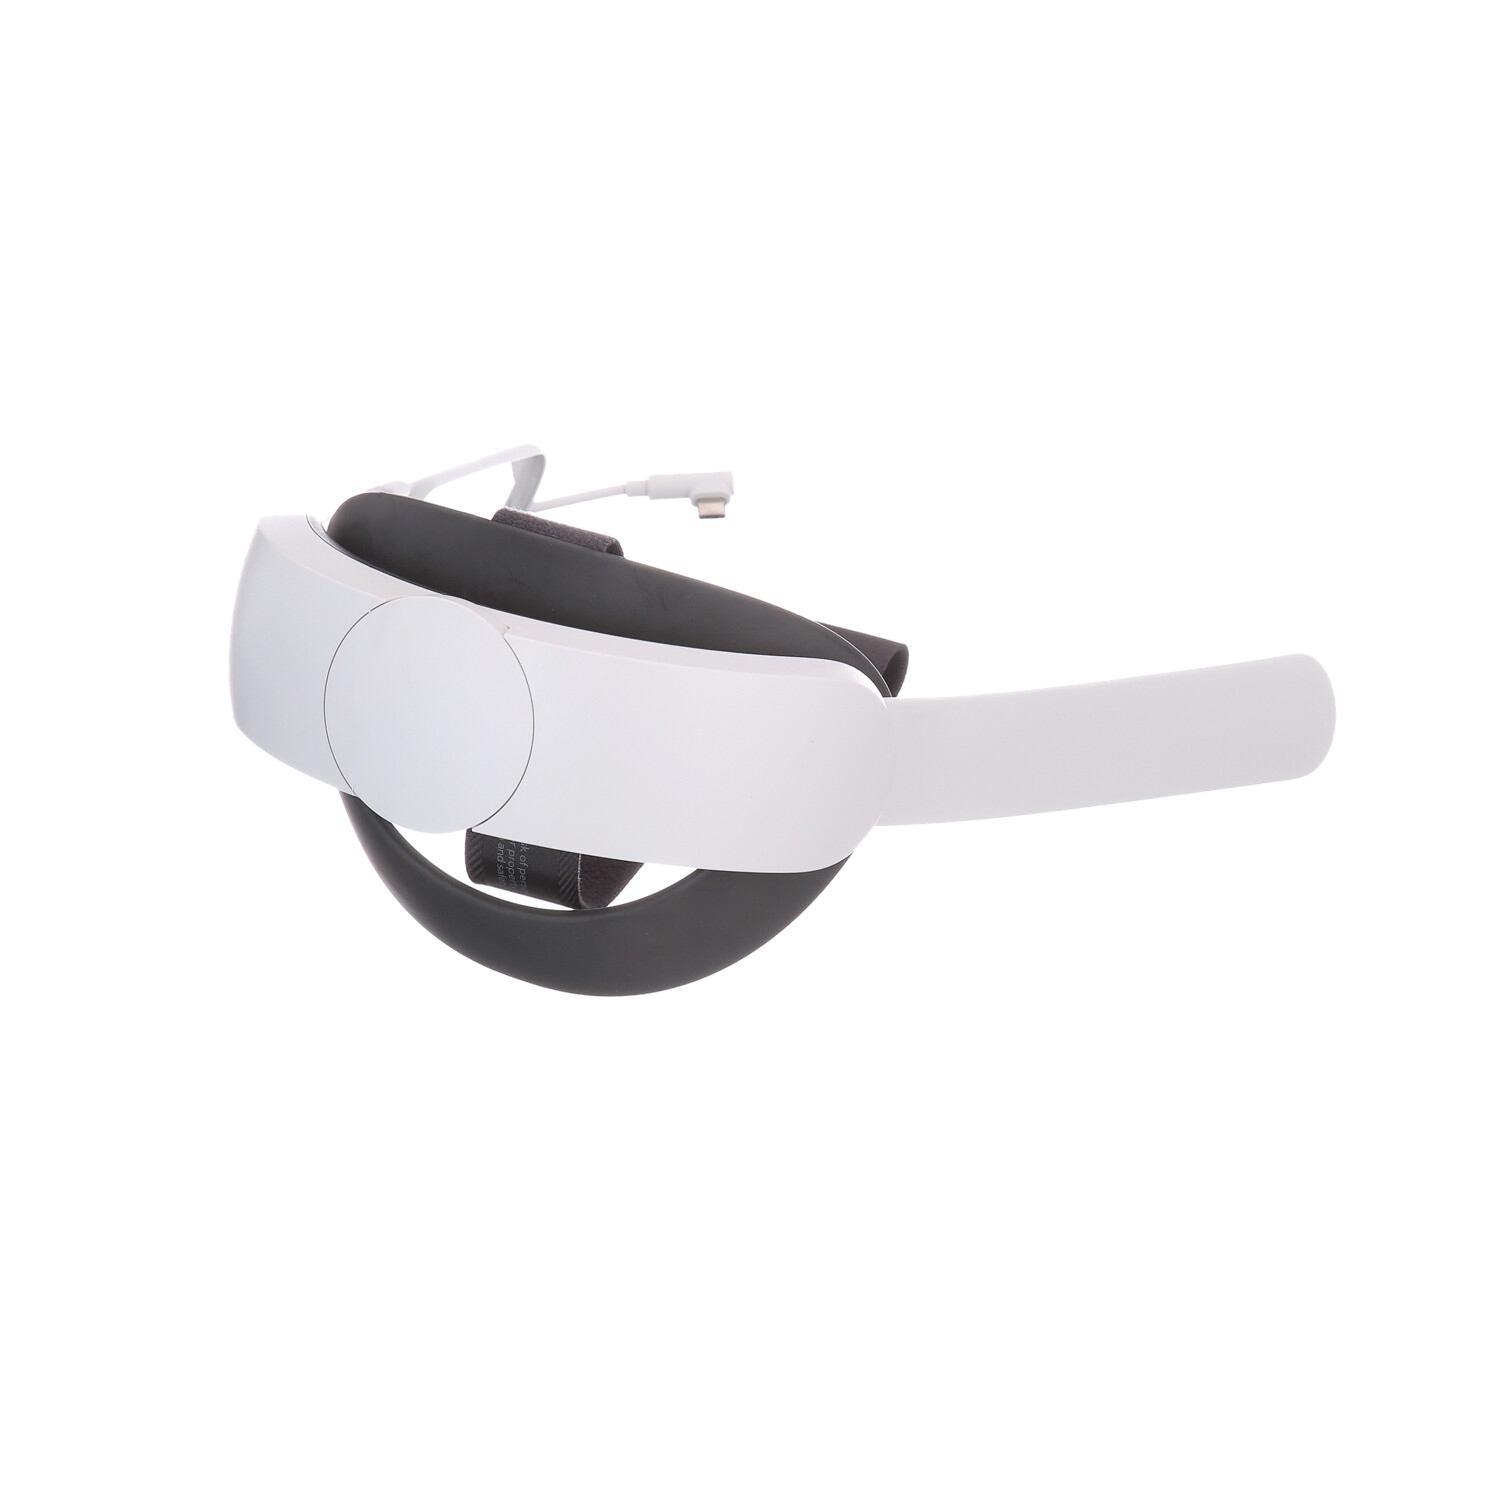 Quest 2 (Oculus) Elite Strap for Comfort and Playtime in Virtual Reality VR - Walmart.com